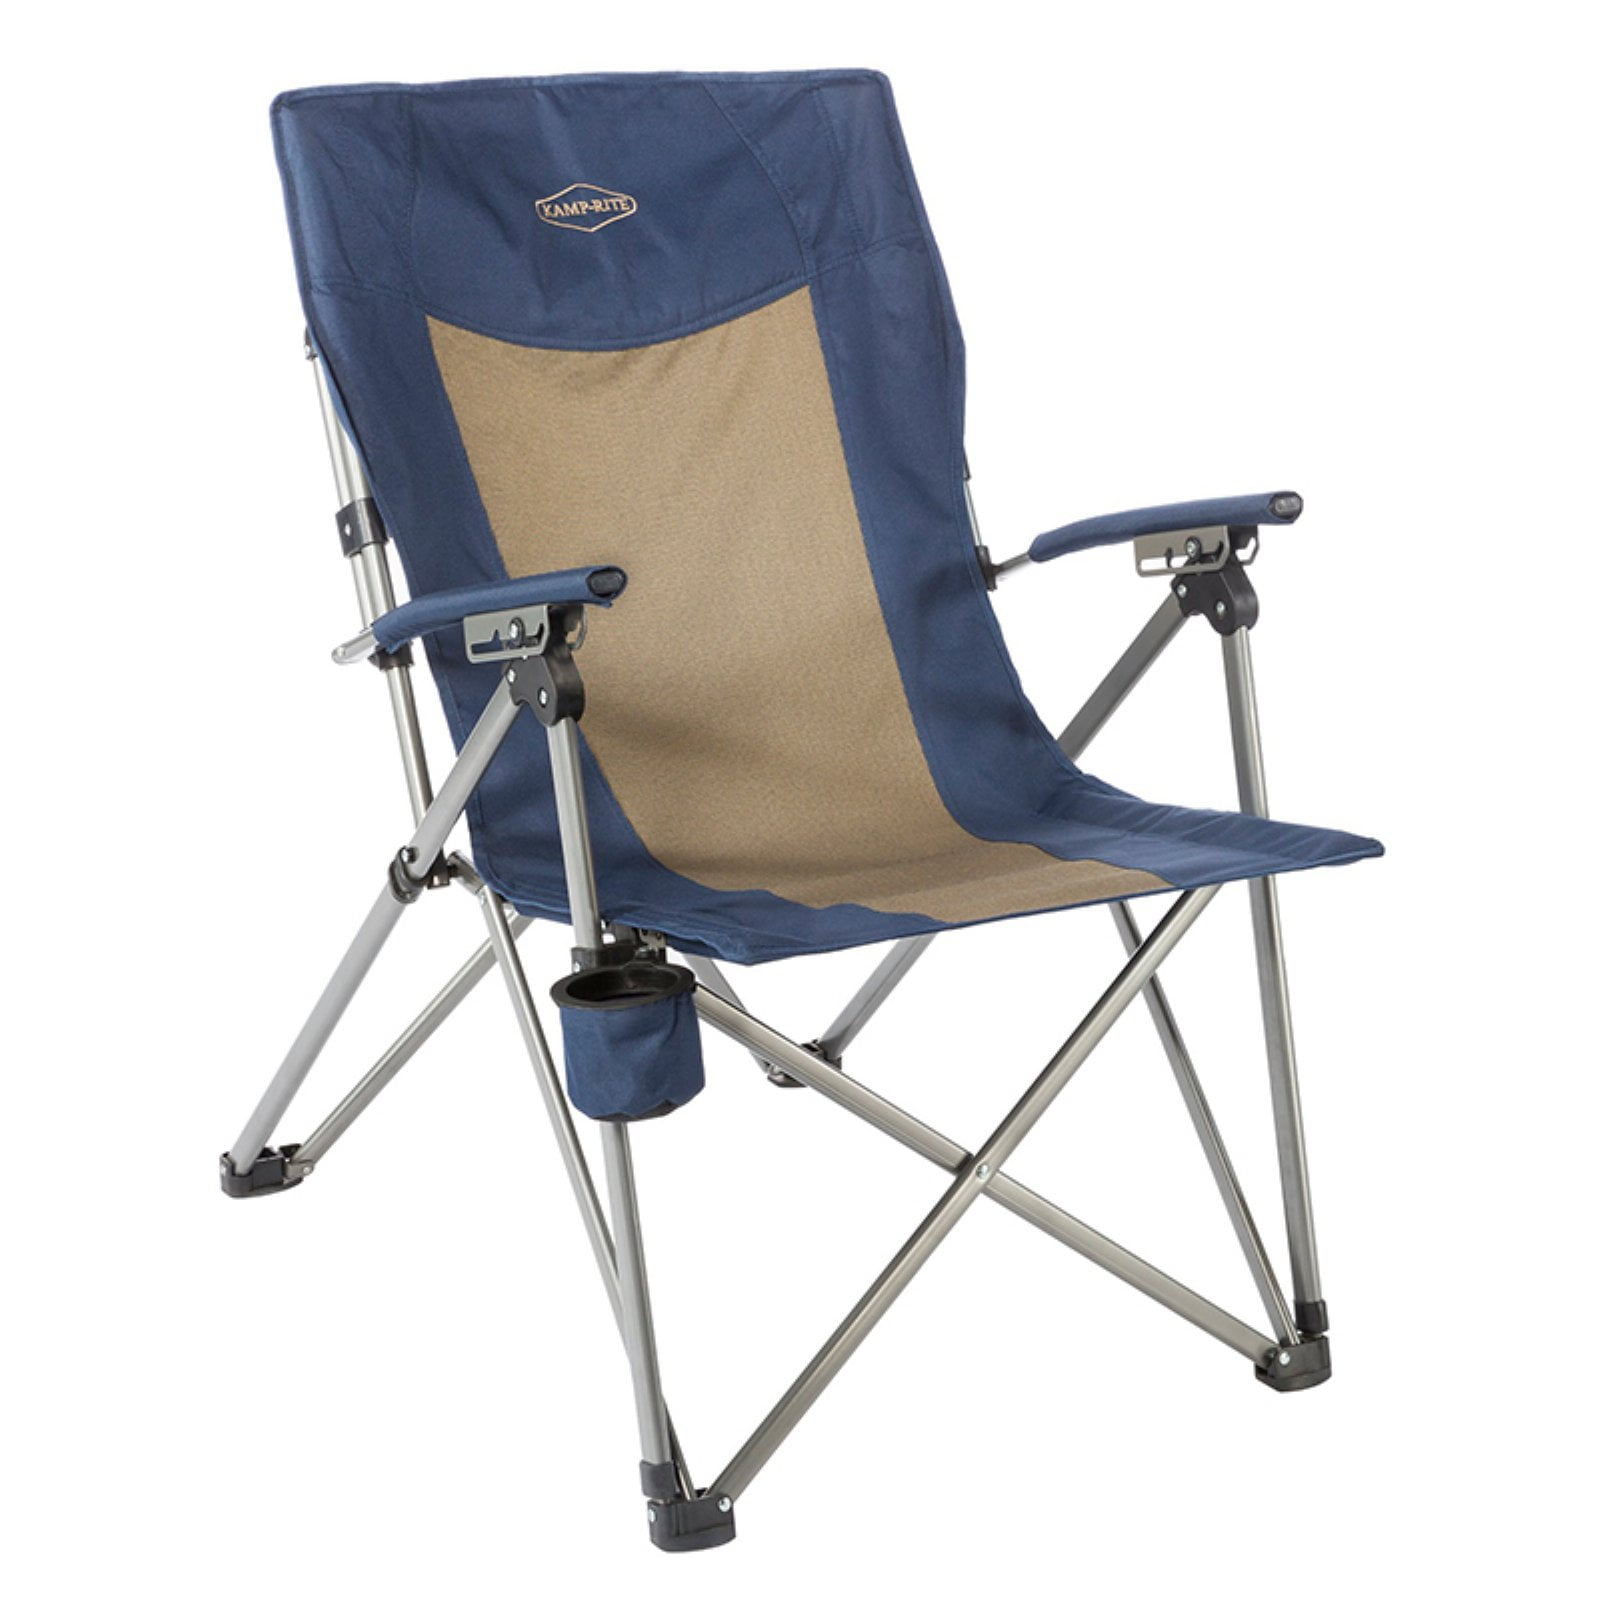 Ozark Trail Outdoor Camping Rocking Chair 2 in 1 Tension Folding Camp Patio Seat for sale online 